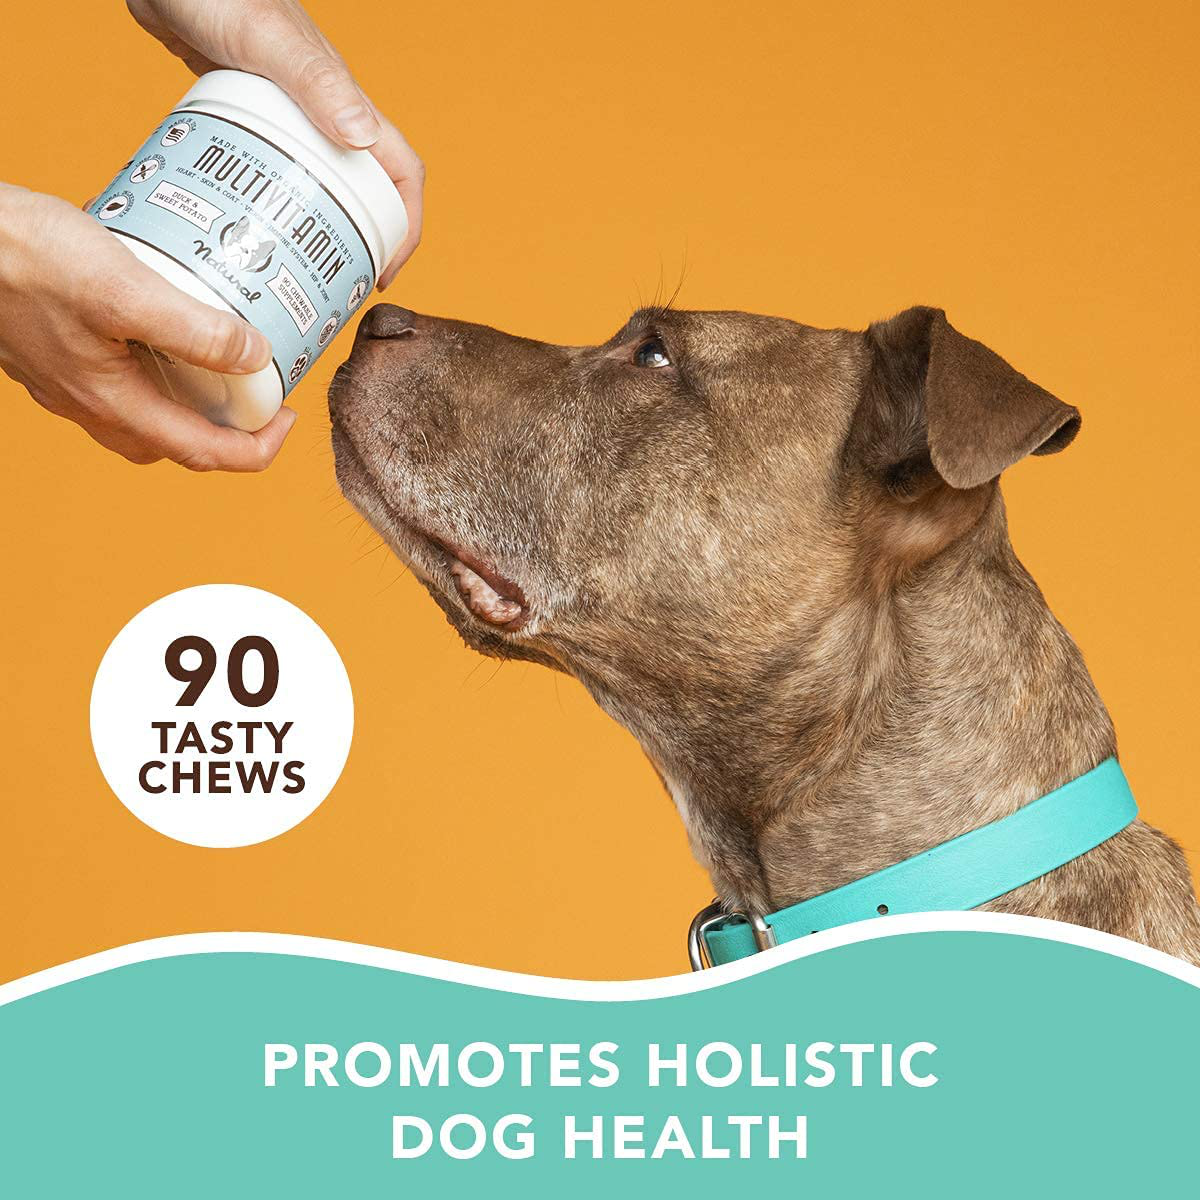 Natural Dog Company - Turmeric and Fish Oil, 35 Essential Vitamins & Nutrients, Immune System, Skin & Coat, and Hip & Joint Support